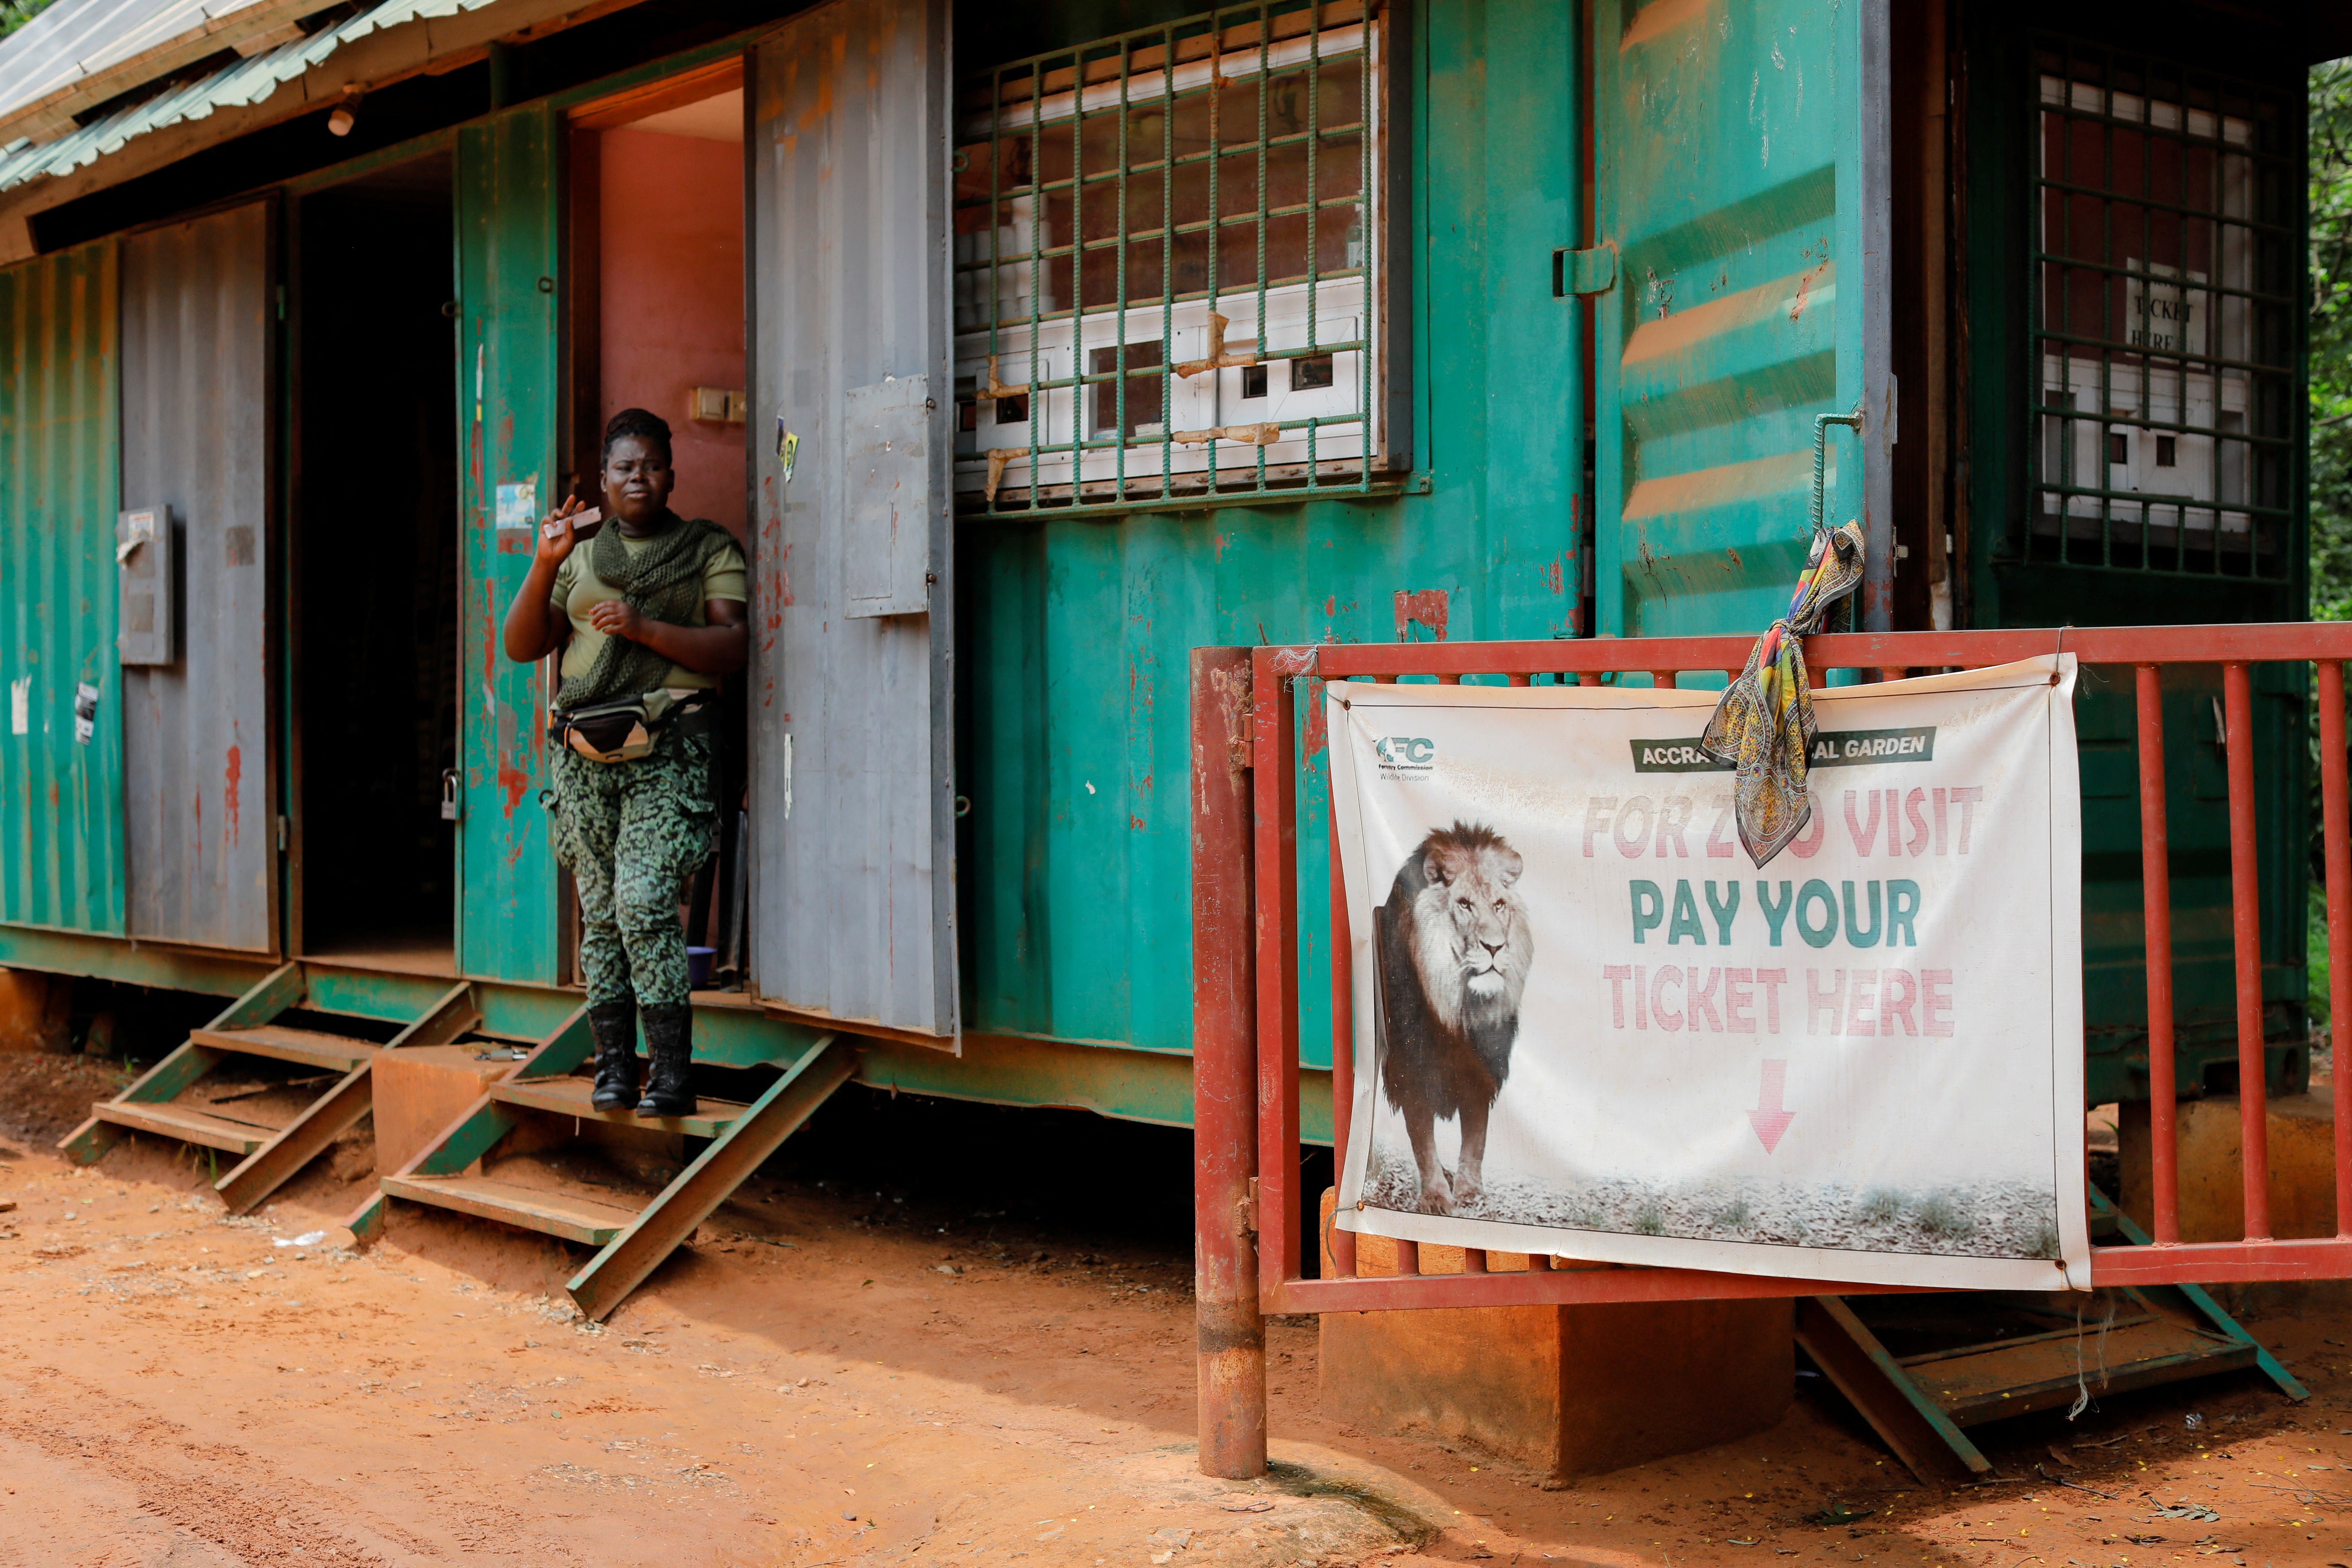 A female warden guards the entrance of the Accra Zoo a day after a lion attack